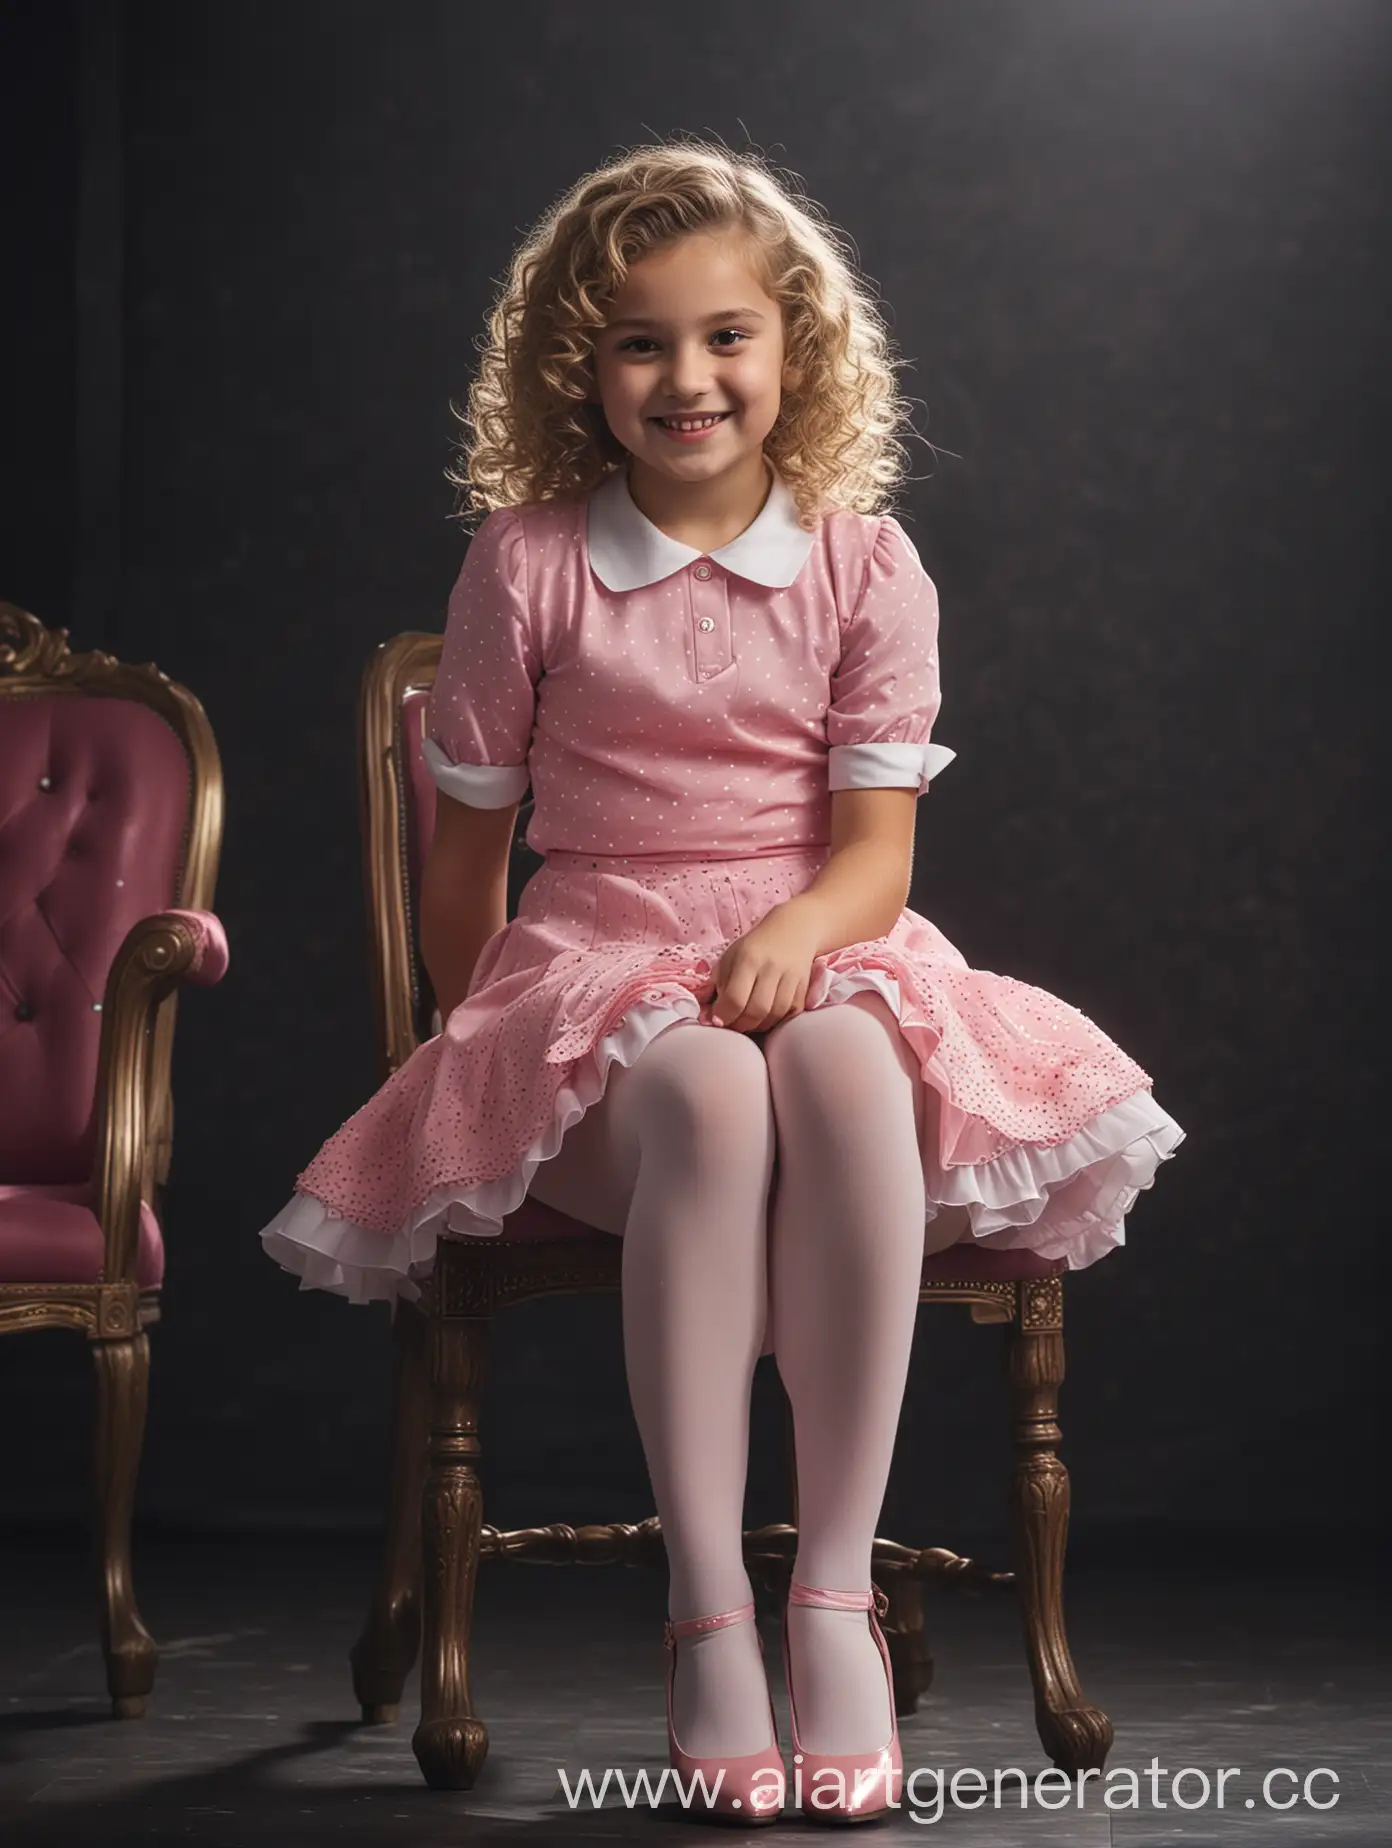 a little girl, 12 years old, elegant pose, sits on the chair, on the stage, cinematic, high quality, dark roots blonde curly hair, pink spotted white opaque tights, so mini skirt, high heels, indian, tight low cut shirt, smile